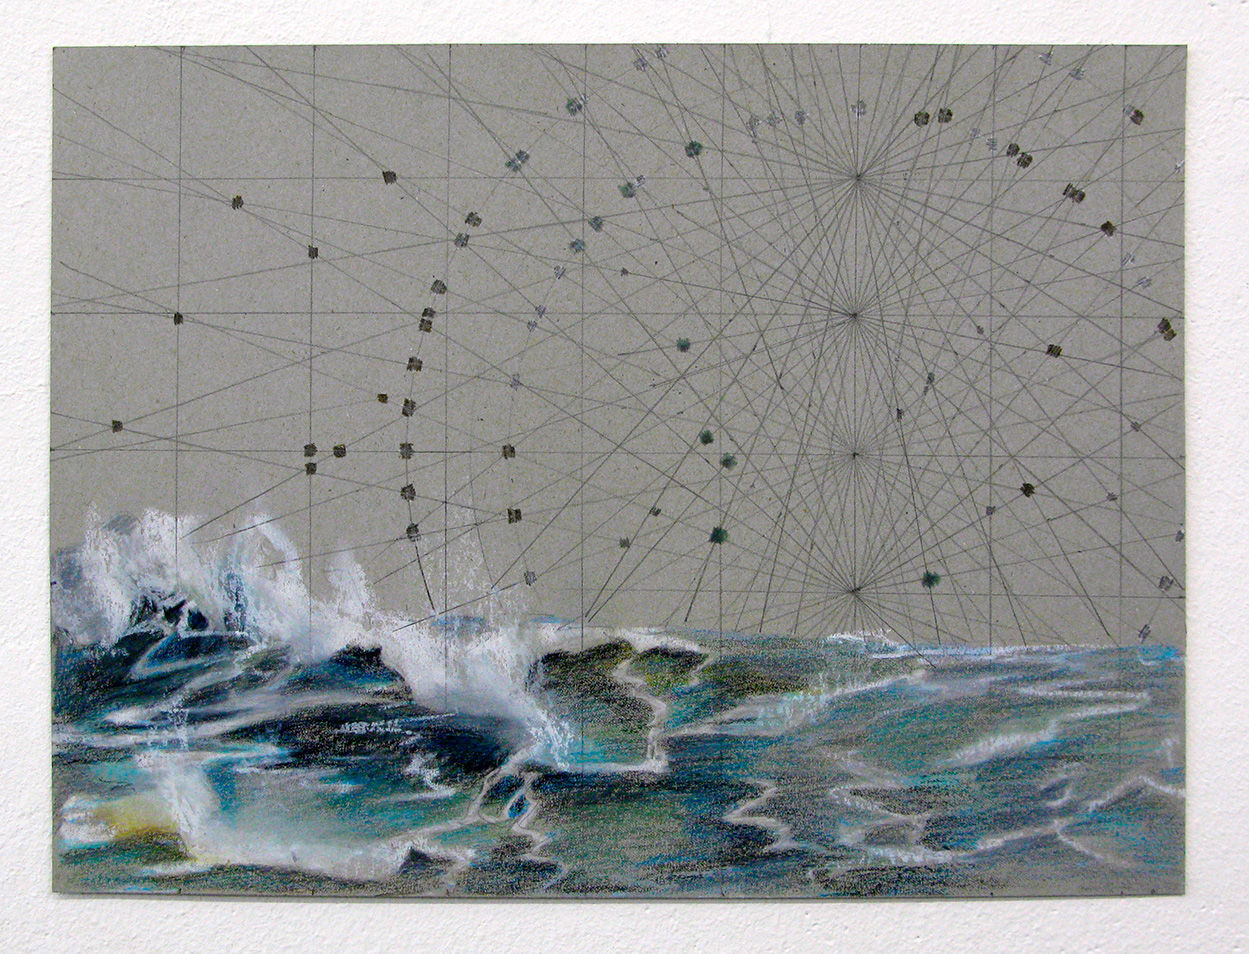 drawing of water and waves with diagrams of lines and circles in the background